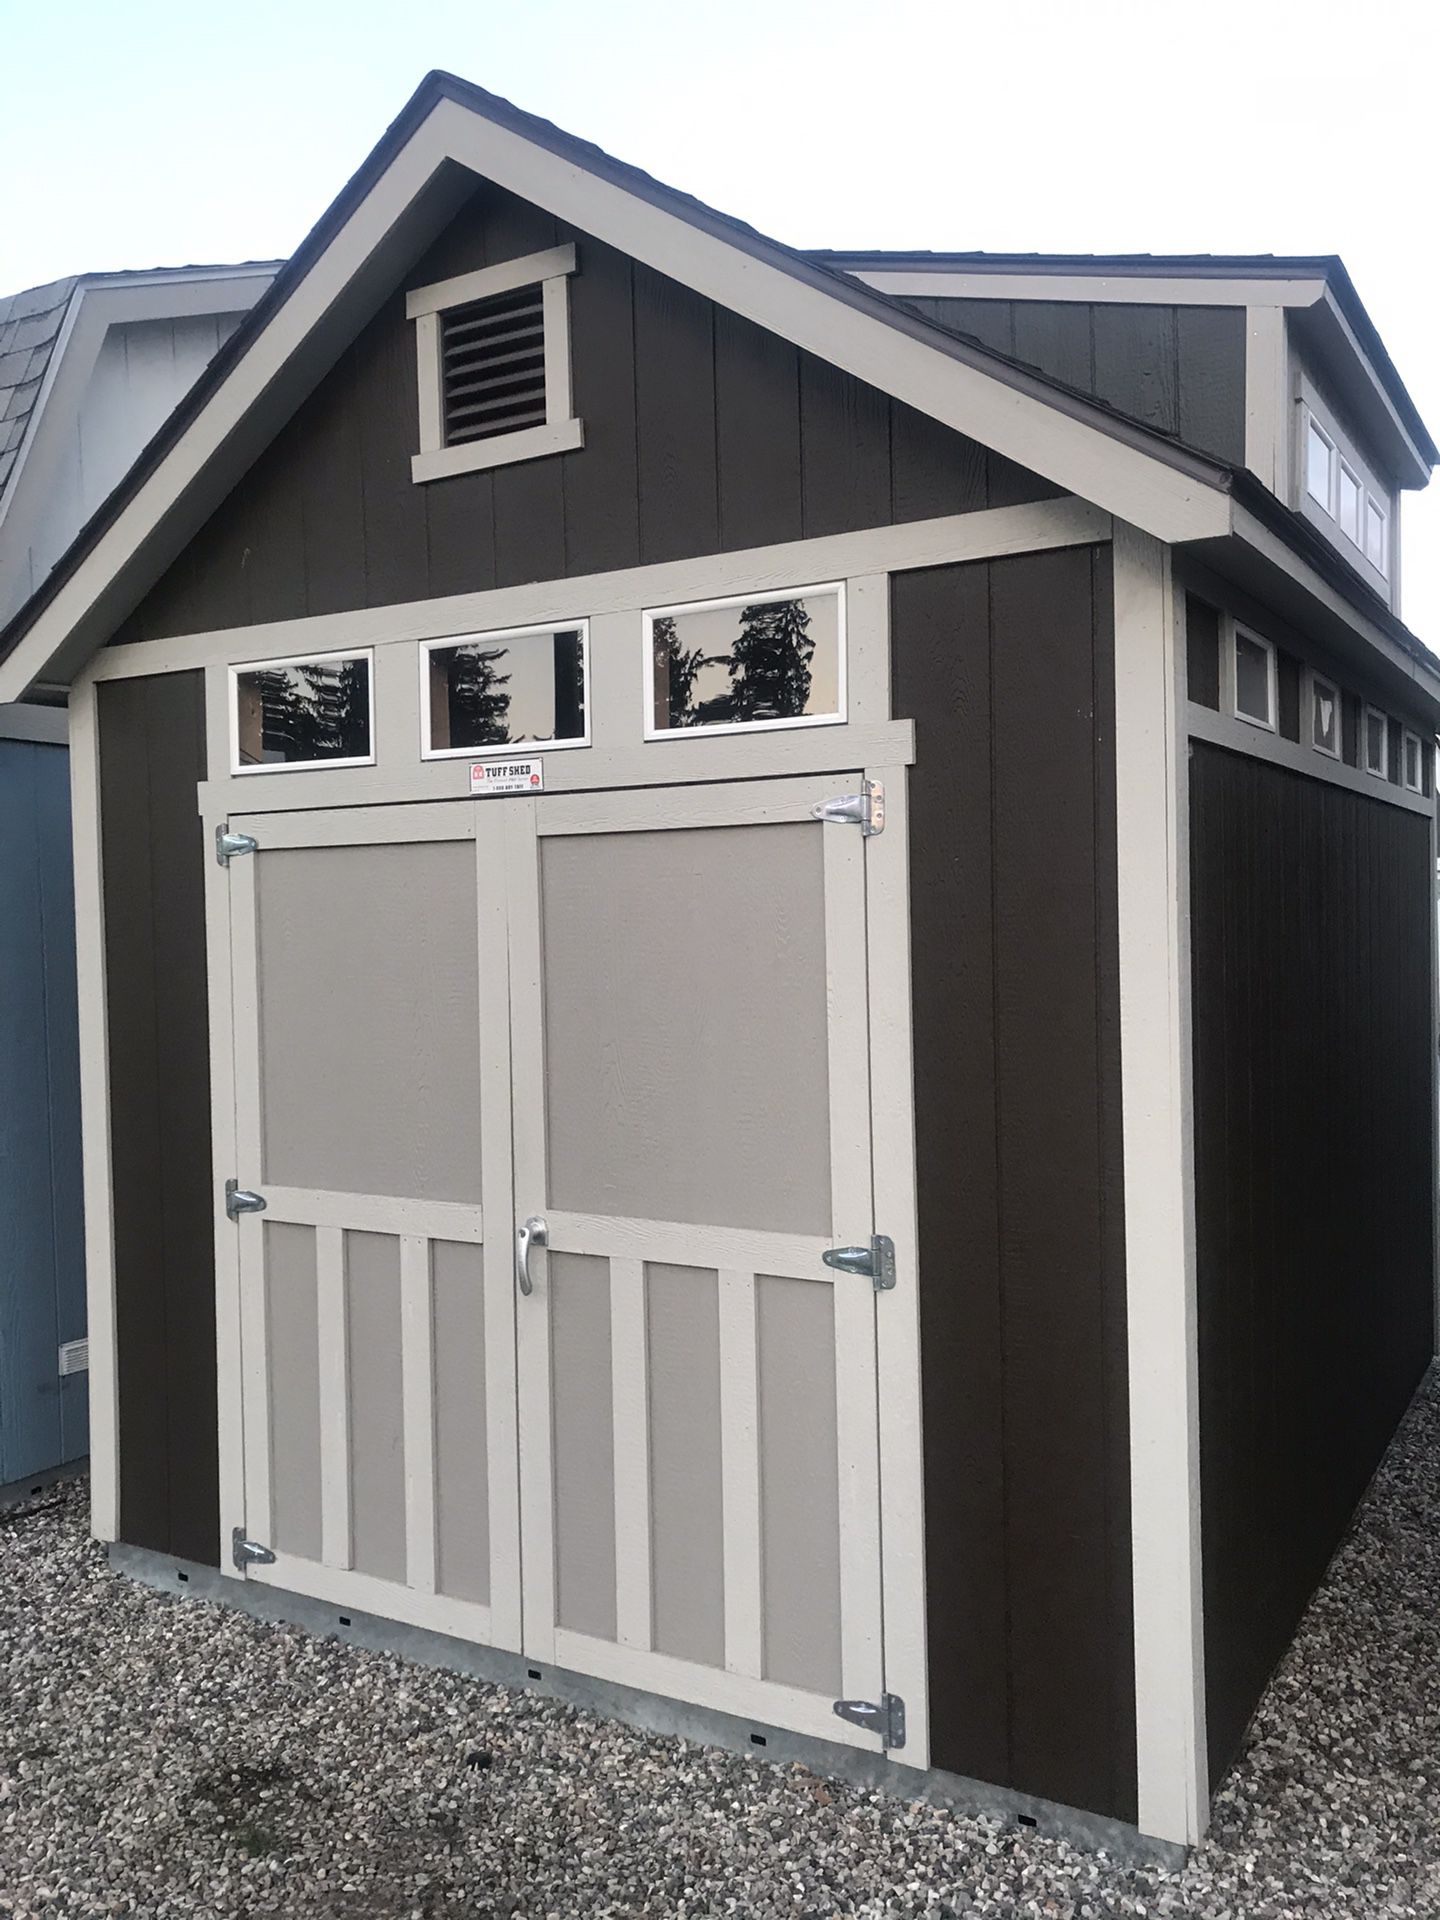 Display shed for sale